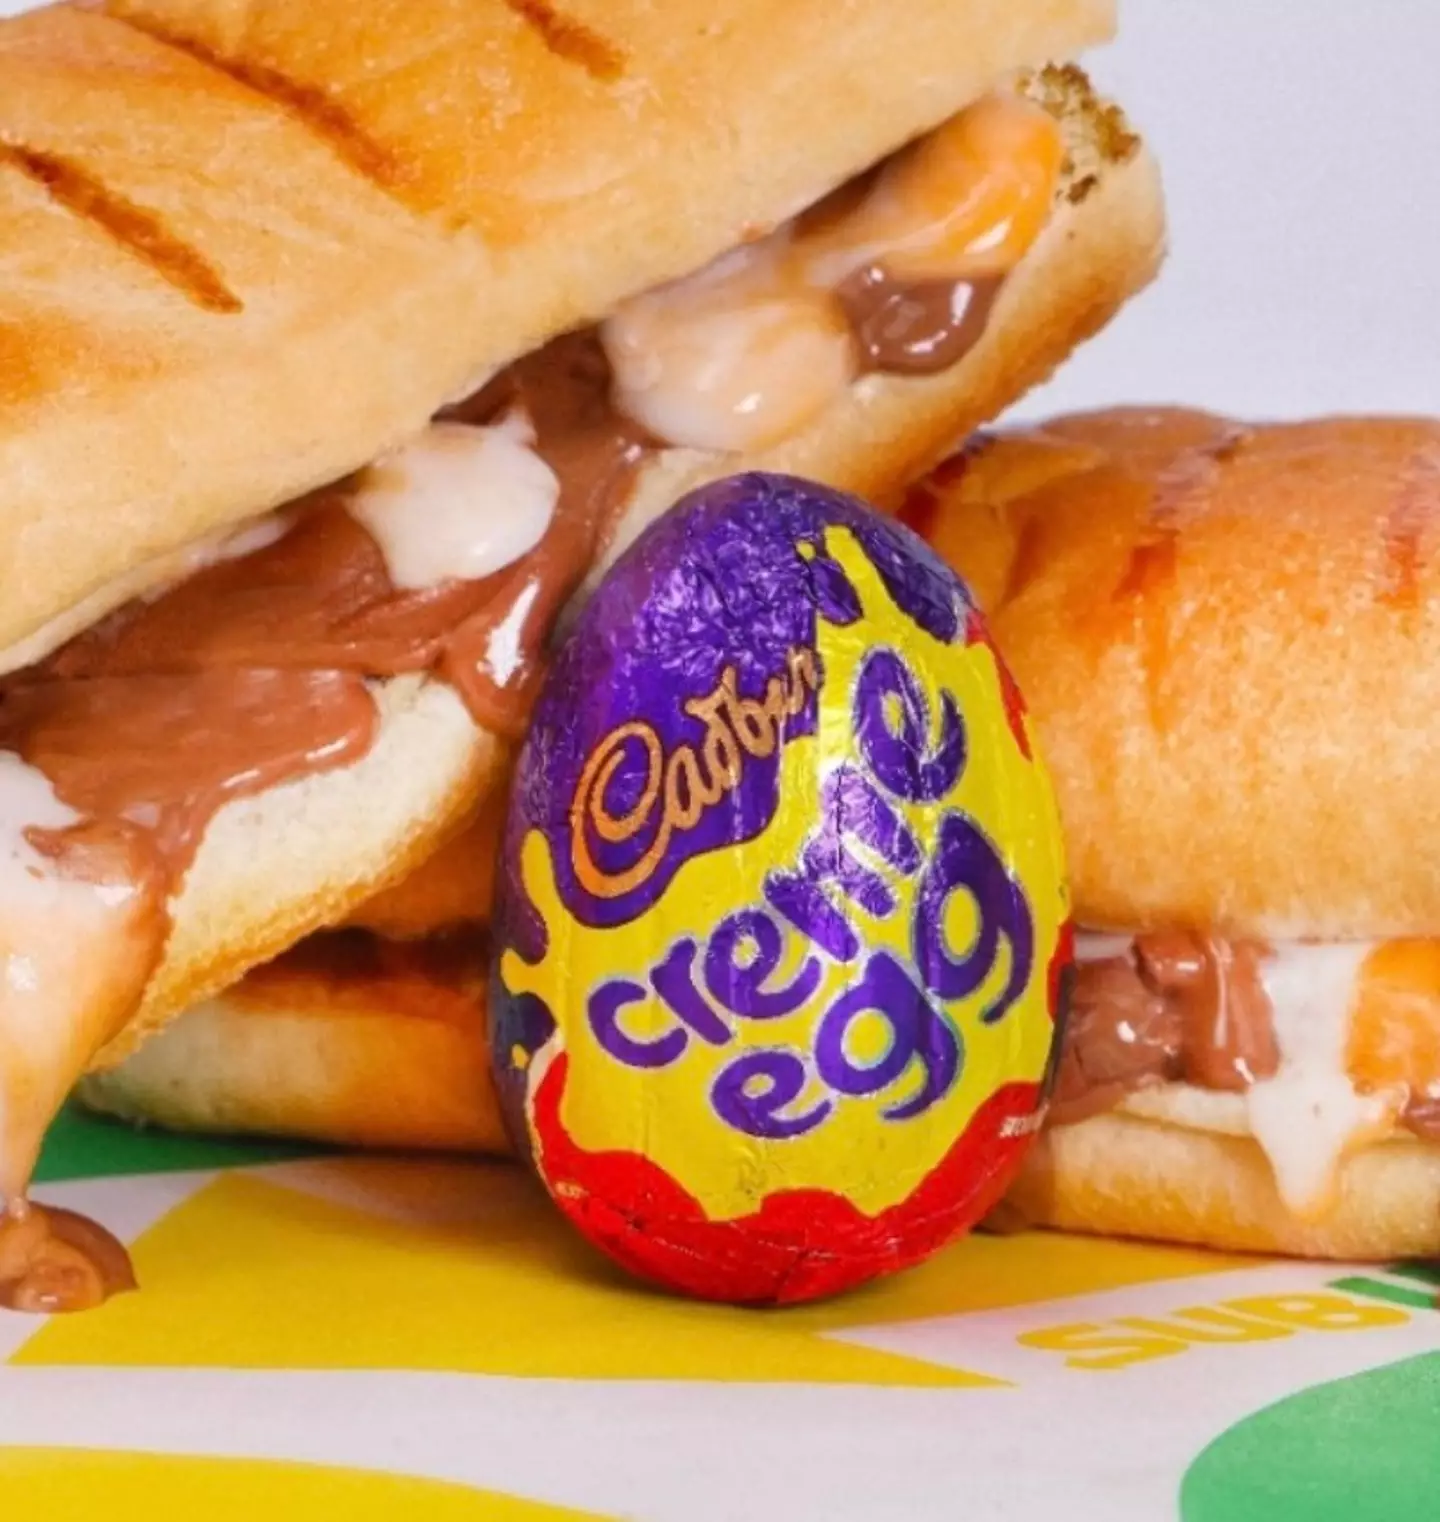 Creme Egg Subways will be available from four locations.